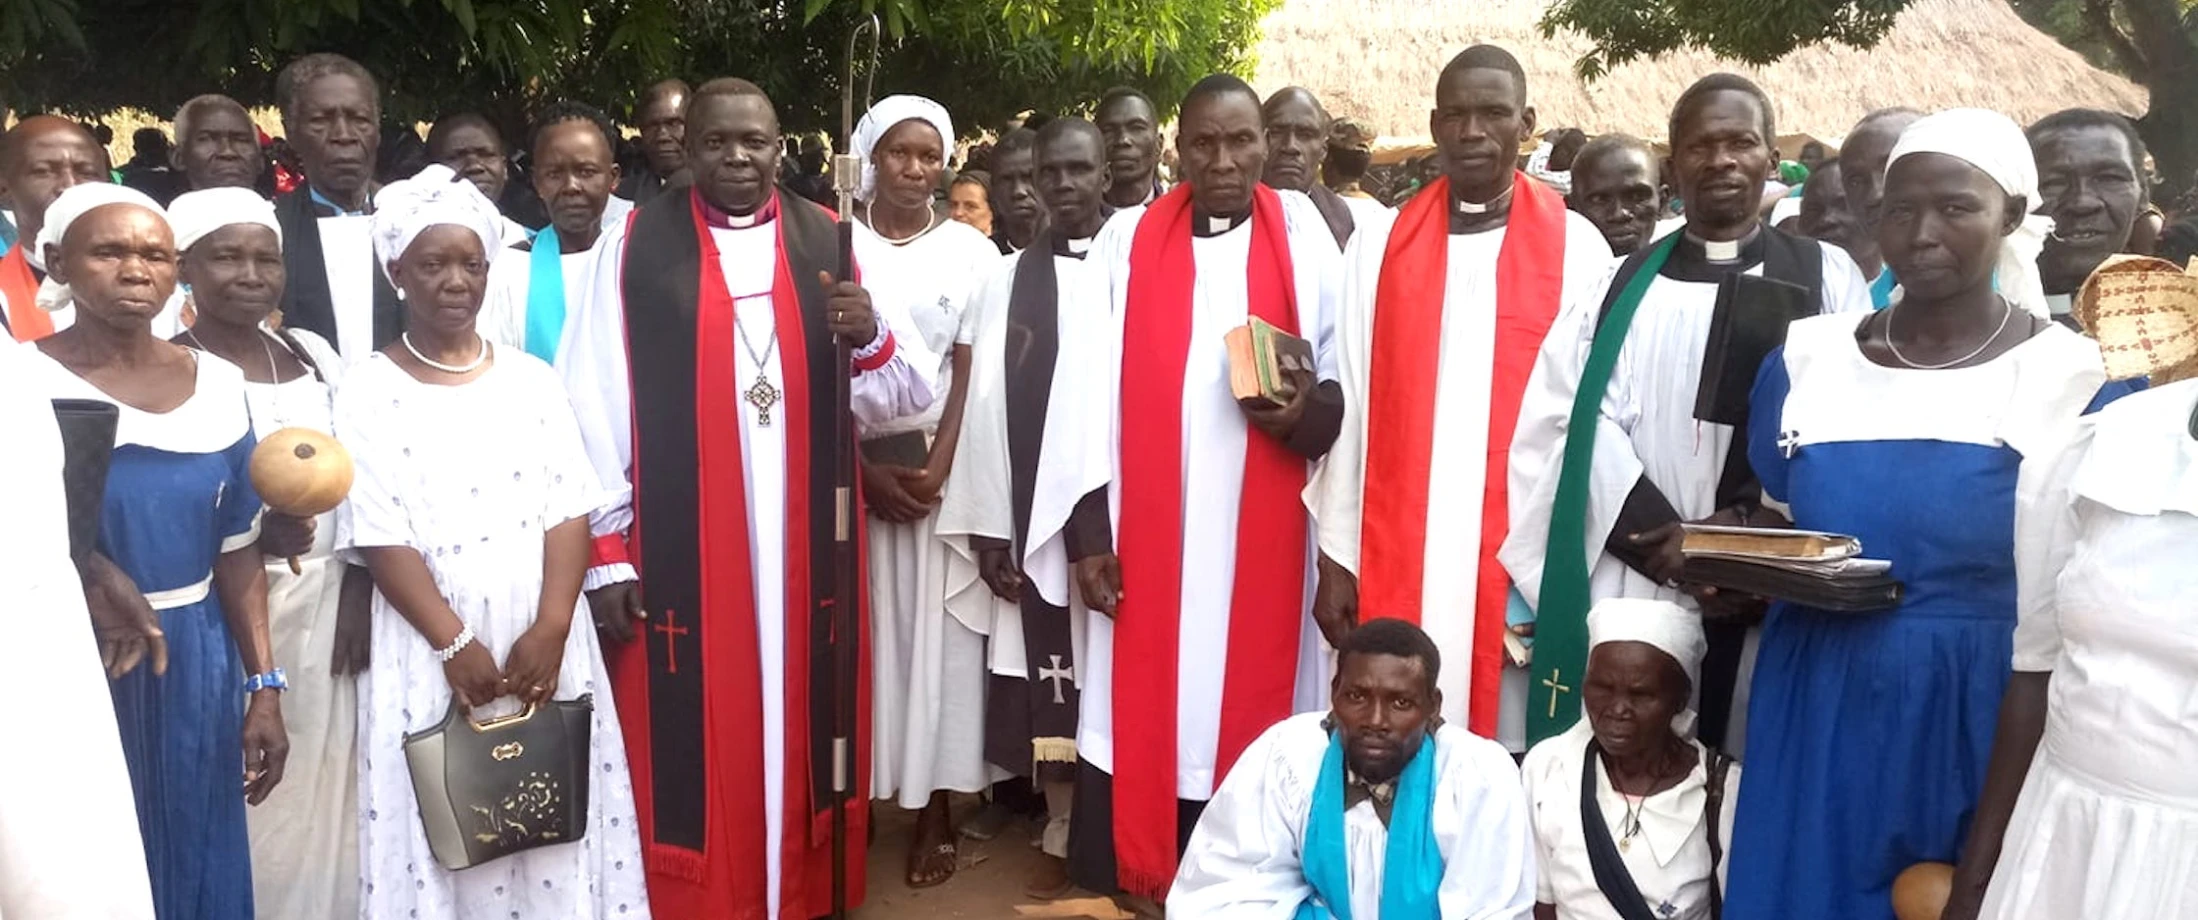 Supporting our link diocese of Maridi  